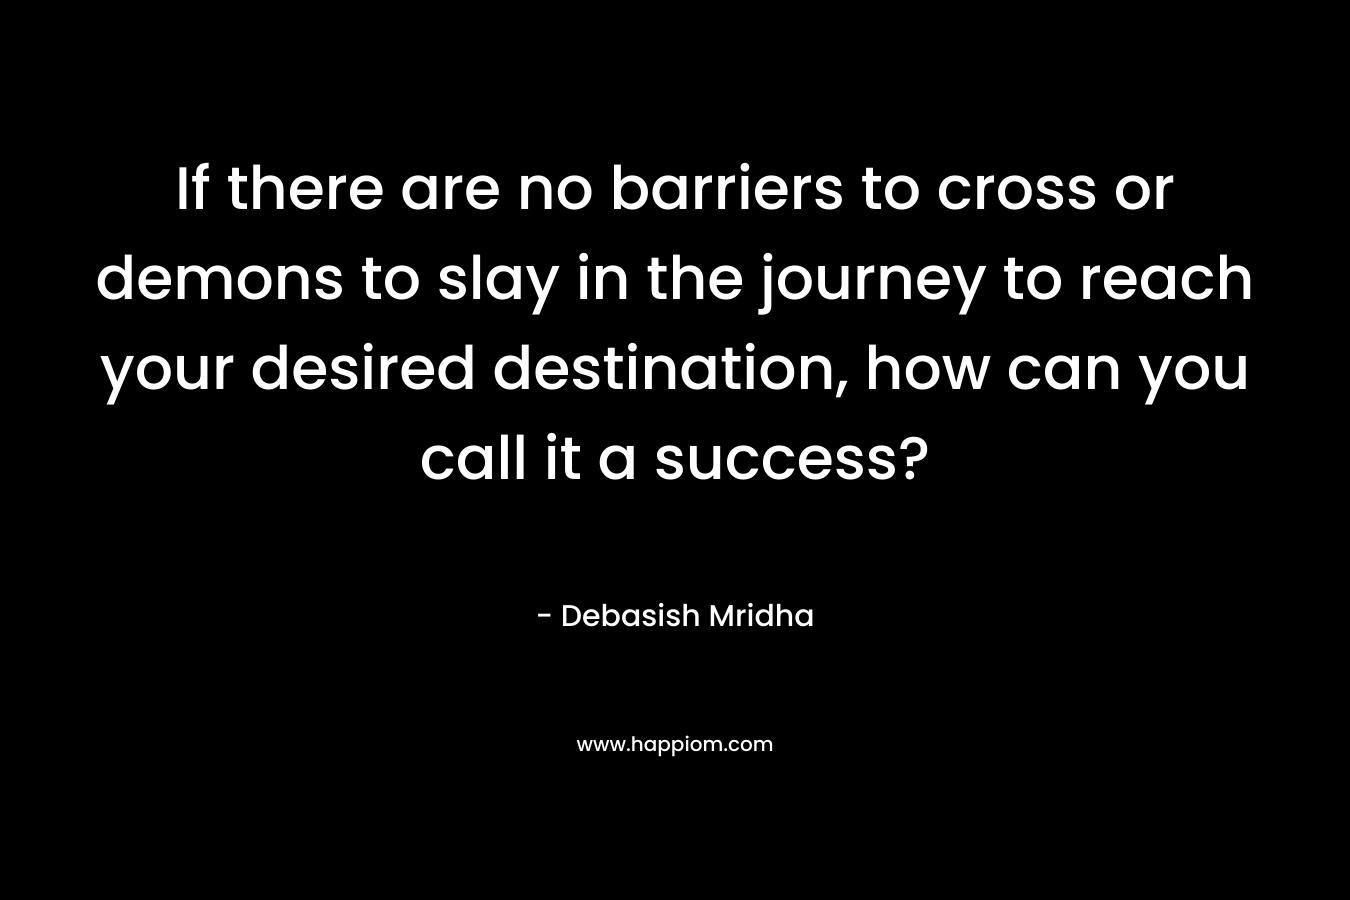 If there are no barriers to cross or demons to slay in the journey to reach your desired destination, how can you call it a success?